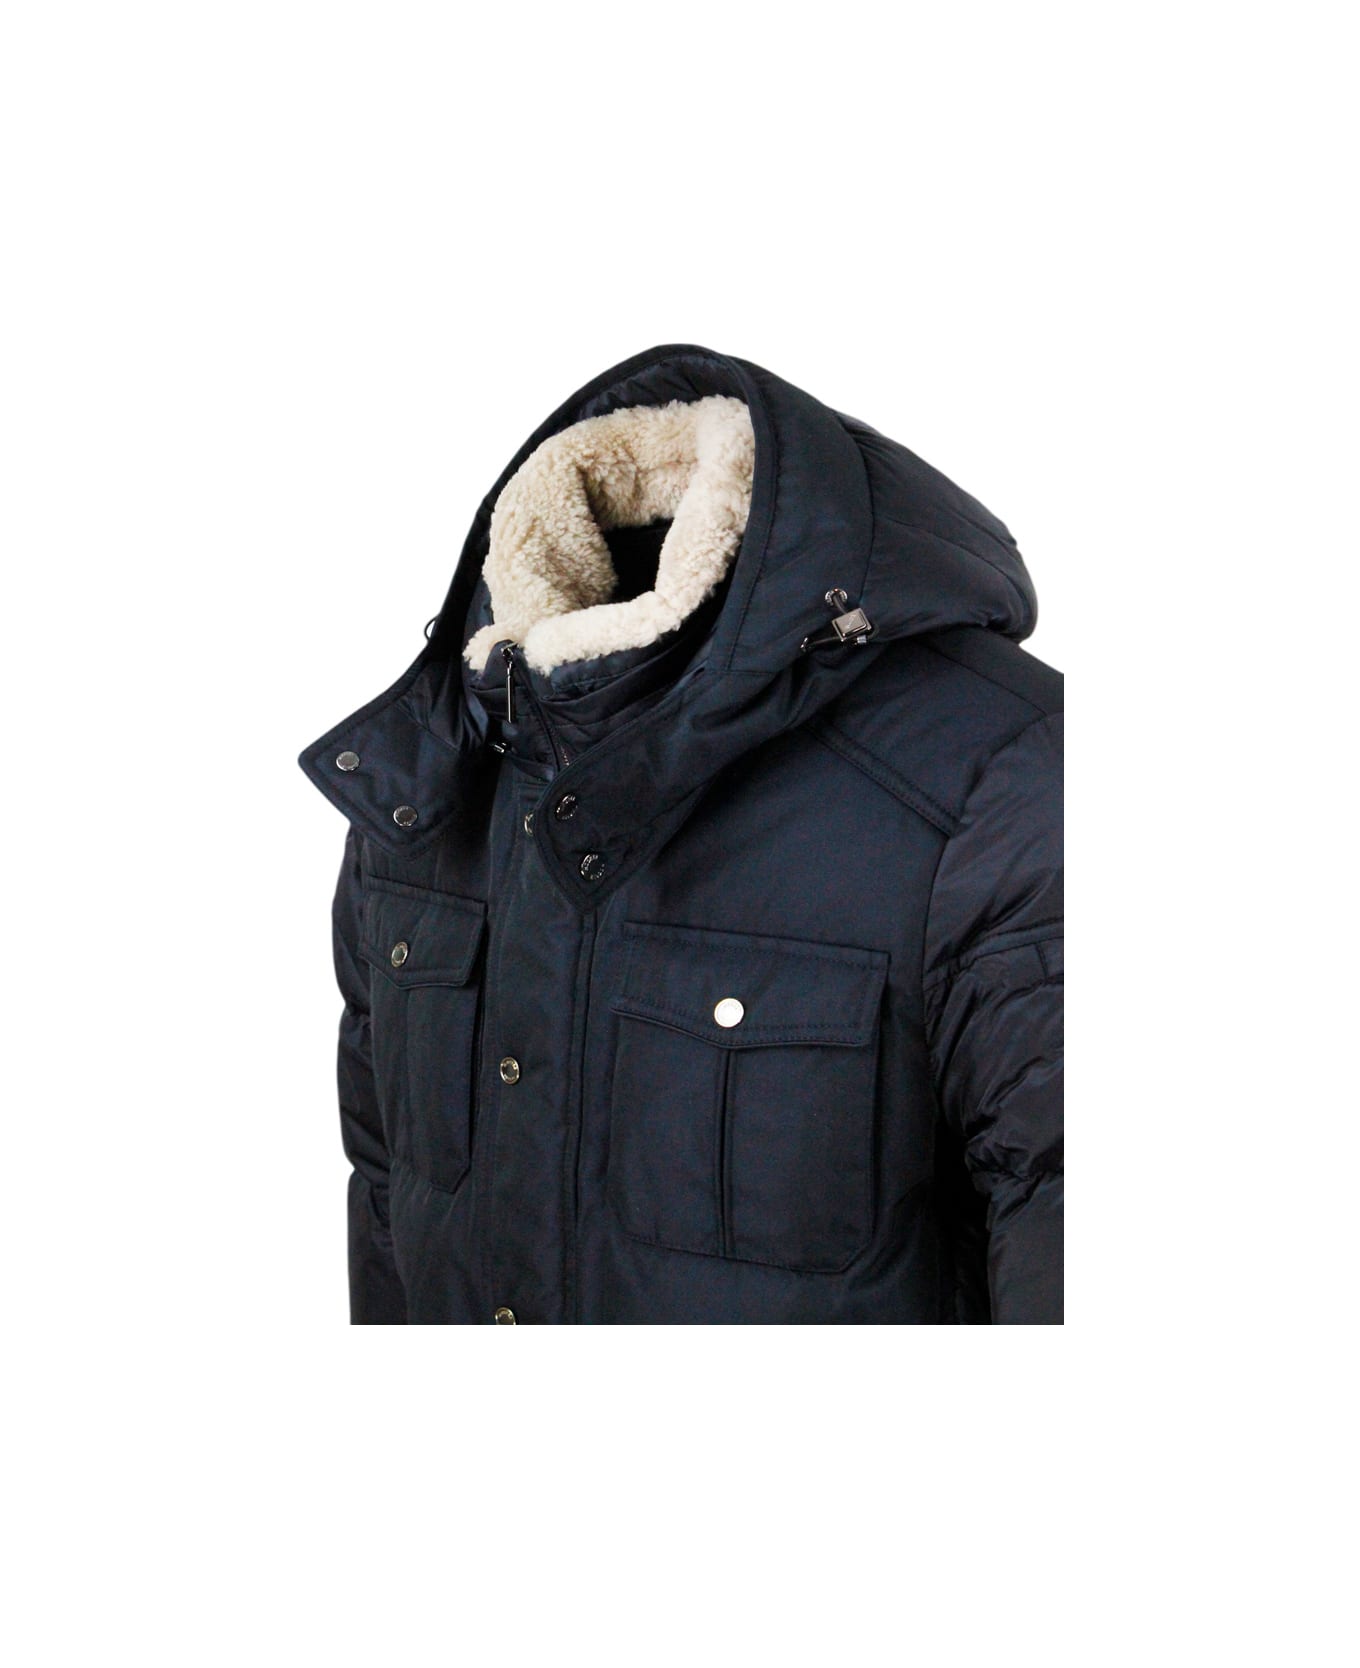 Moorer Bomber Jacket Padded With Goose Feathers With Removable Hood And Collar In Curly Sheepskin, Front And Shoulders In Material, Closure With Zip And Butt - Blu ダウンジャケット